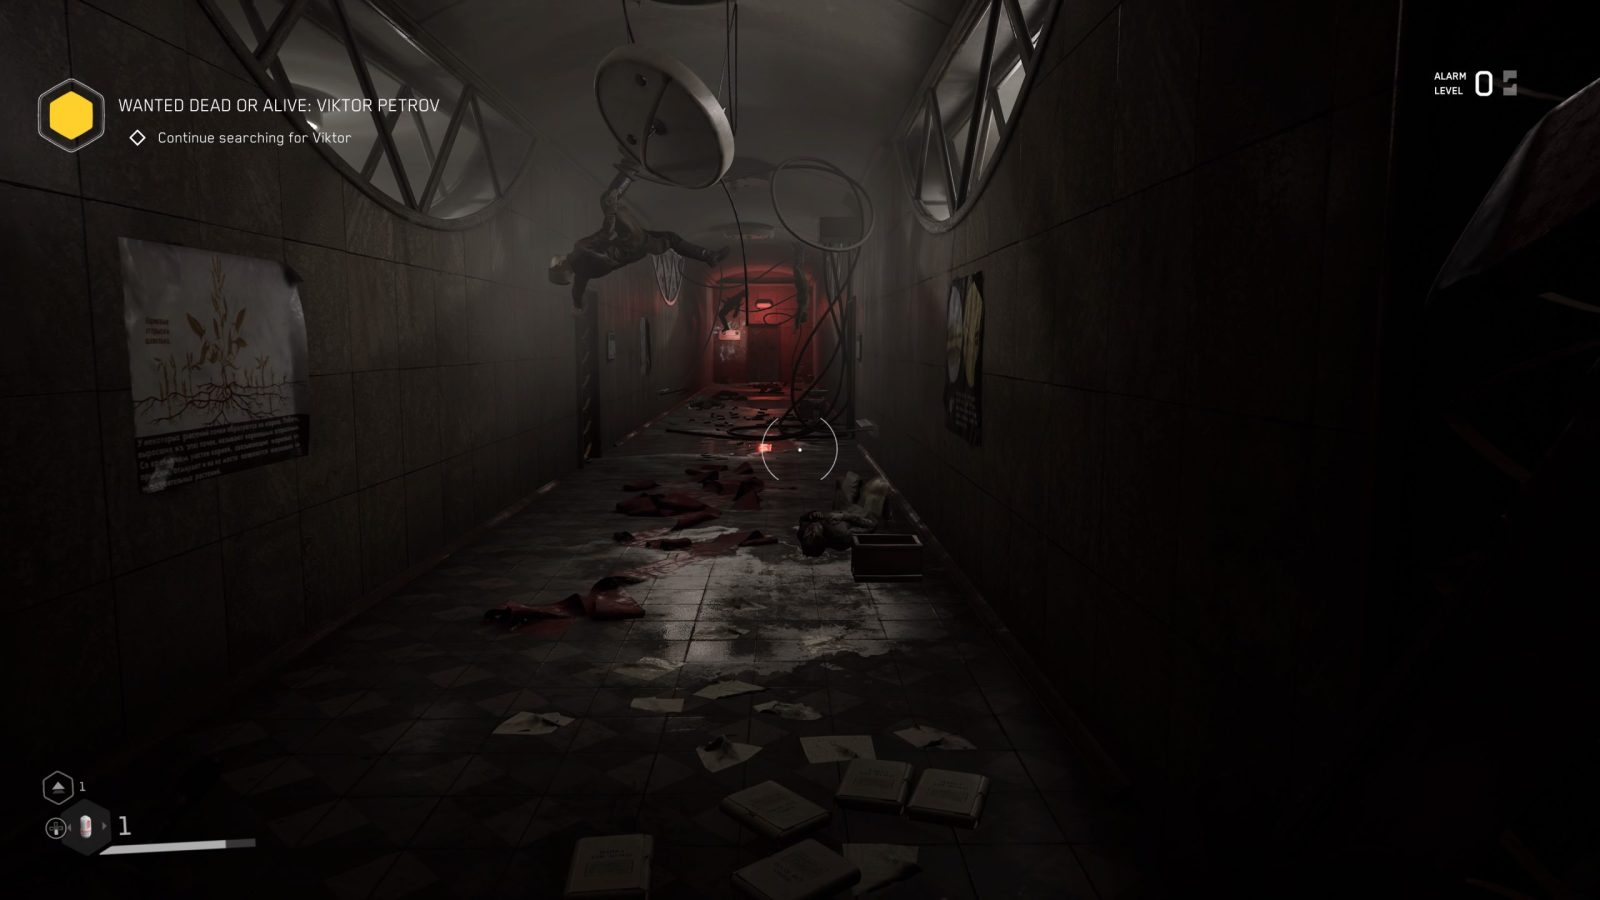 Exploring the Pros and Cons of Atomic Heart: A Detailed Review of the  Game's Strengths and